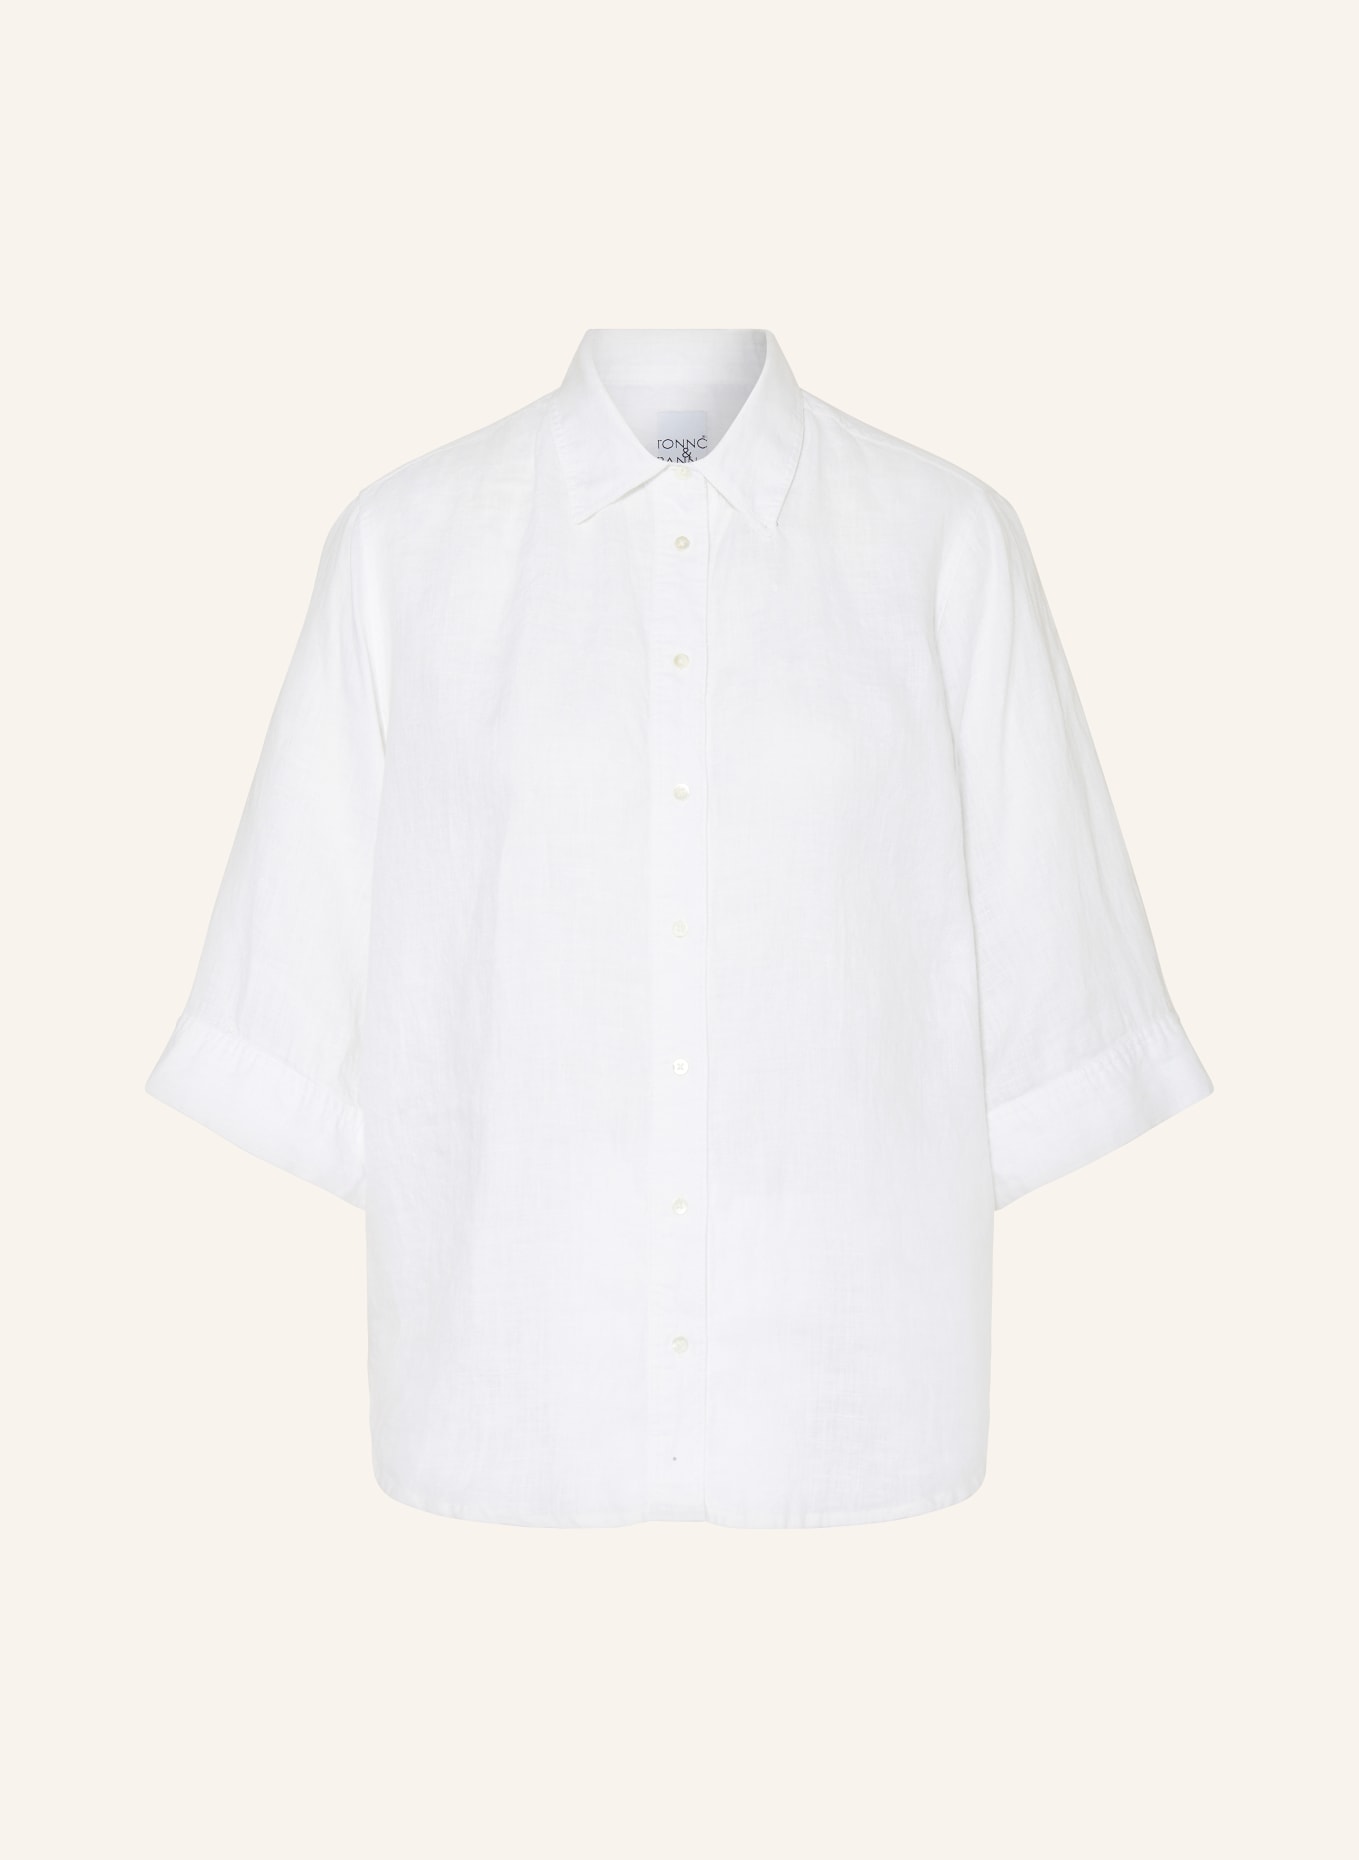 TONNO & PANNA Shirt blouse made of linen, Color: WHITE (Image 1)